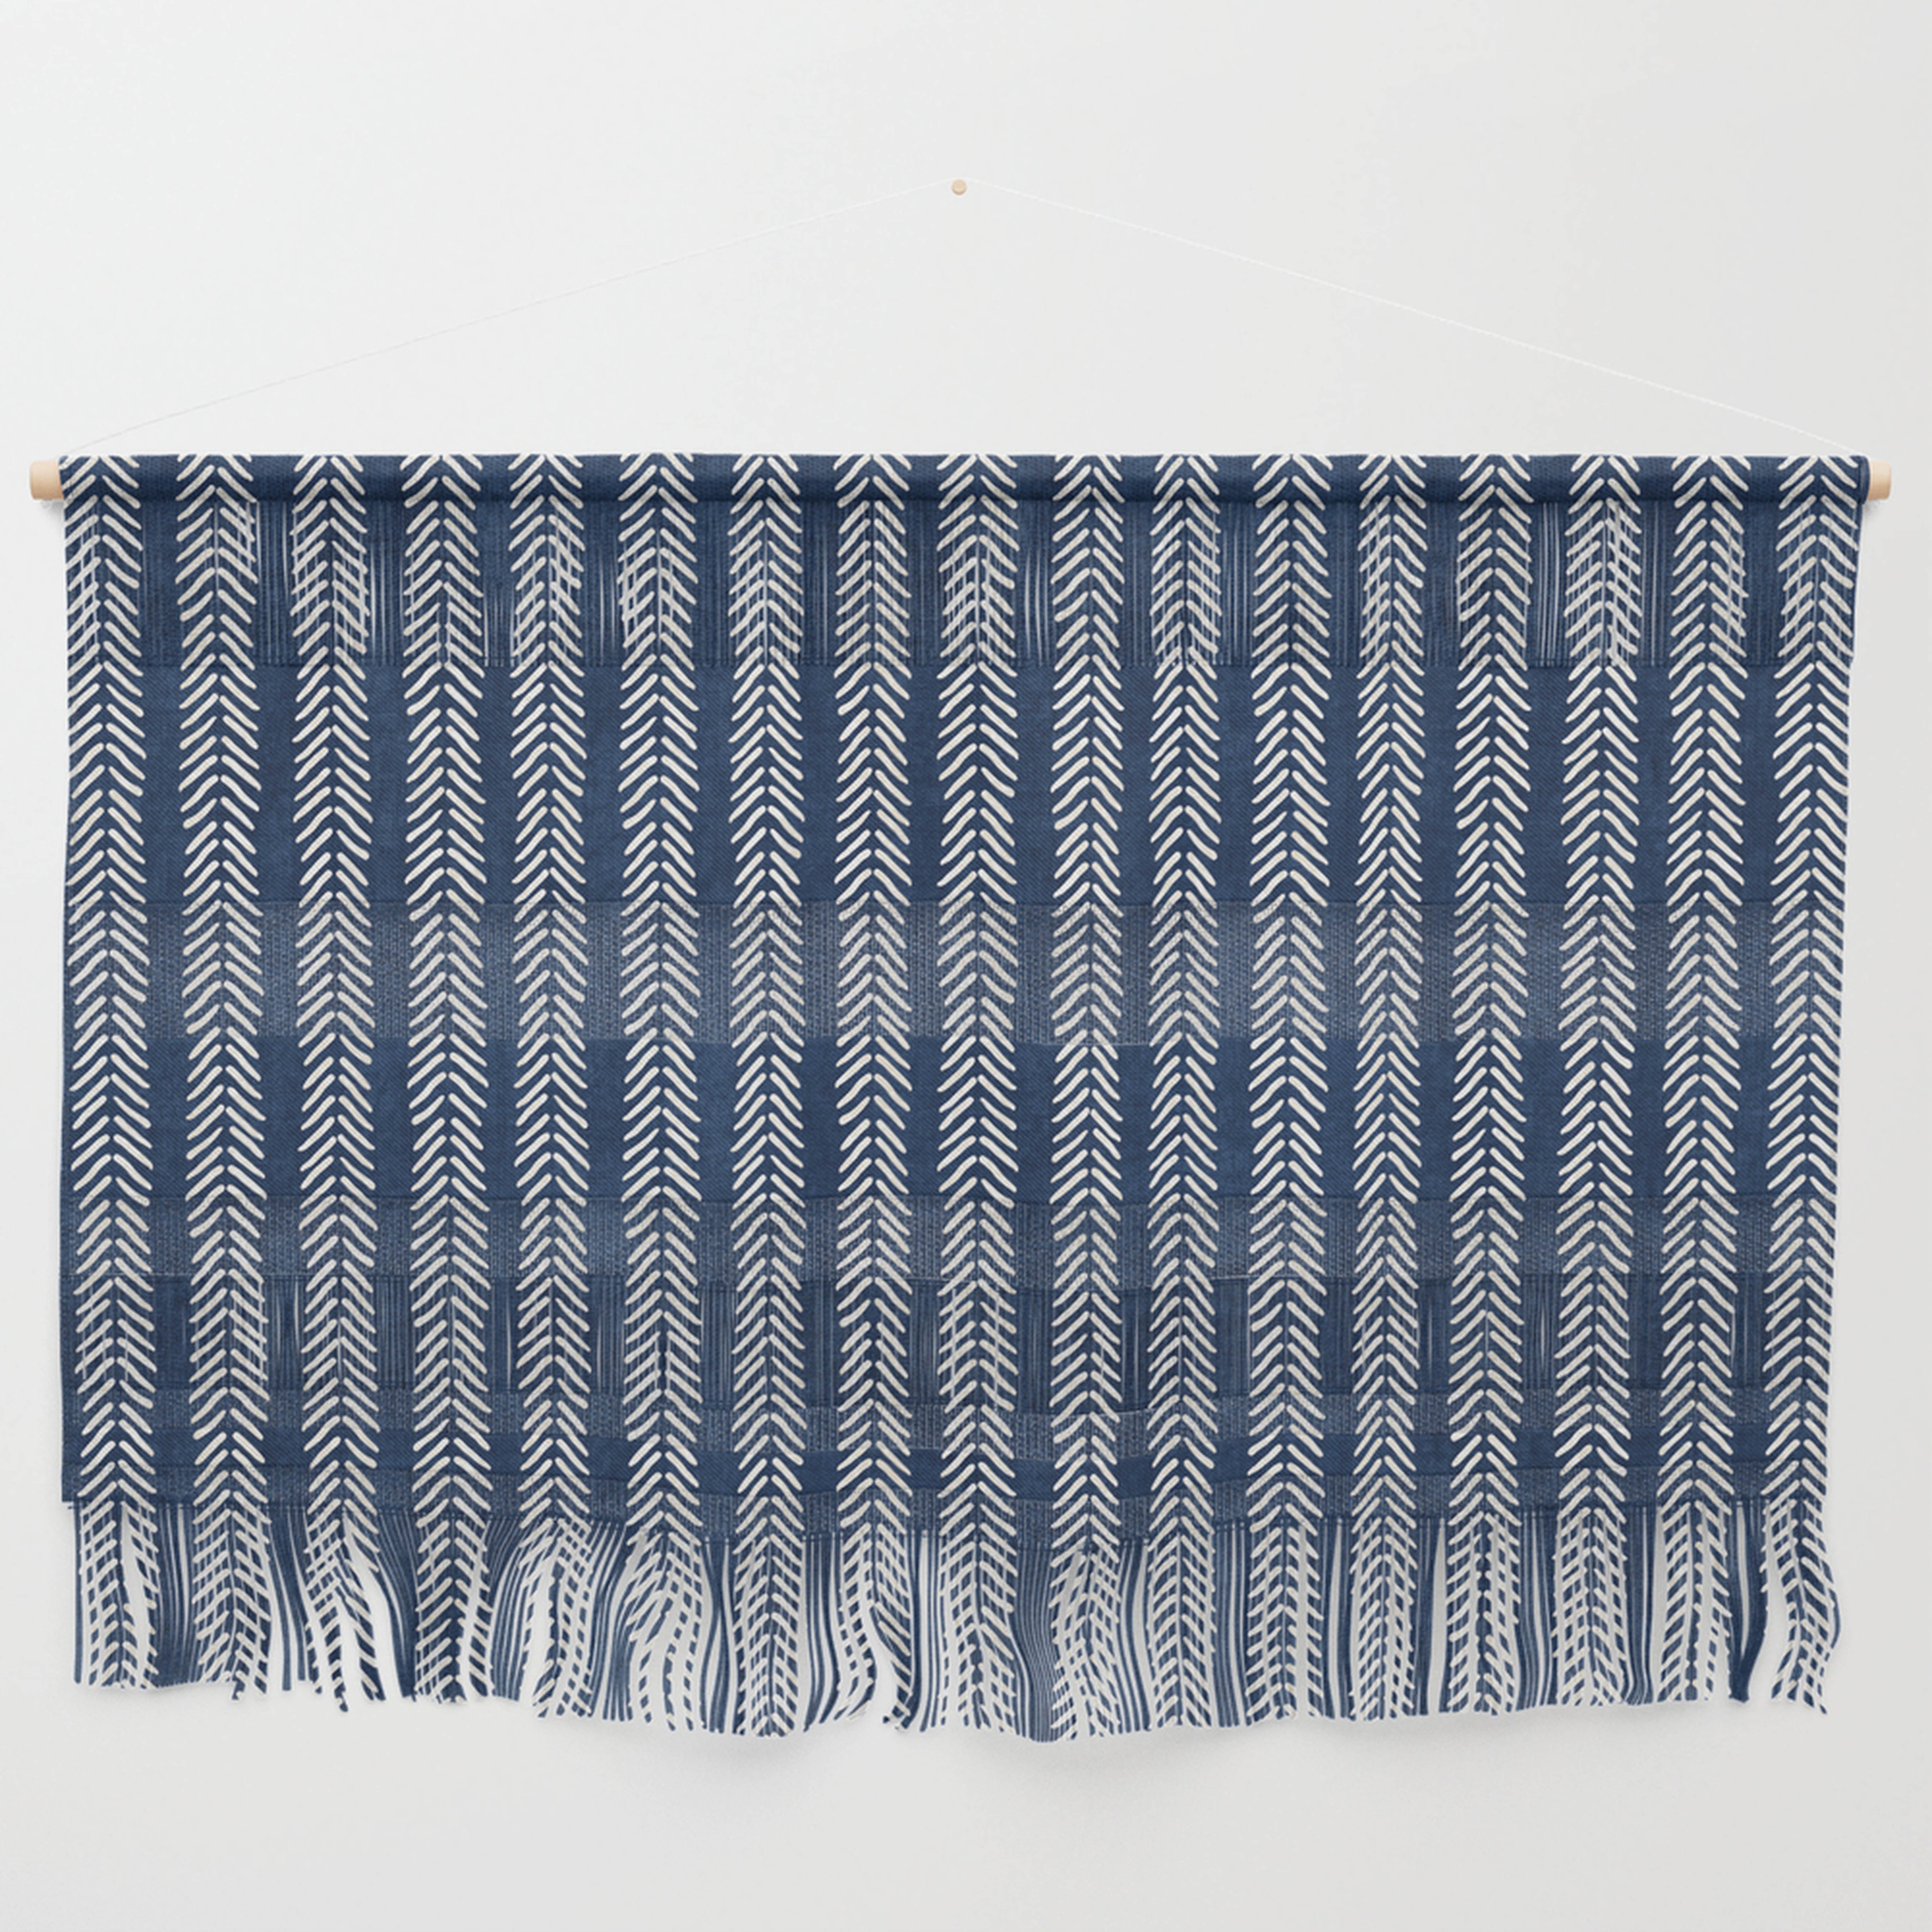 Small Navy Arrowheads Wall Hanging by House Of Haha - Large 47" x 32.25" - Society6